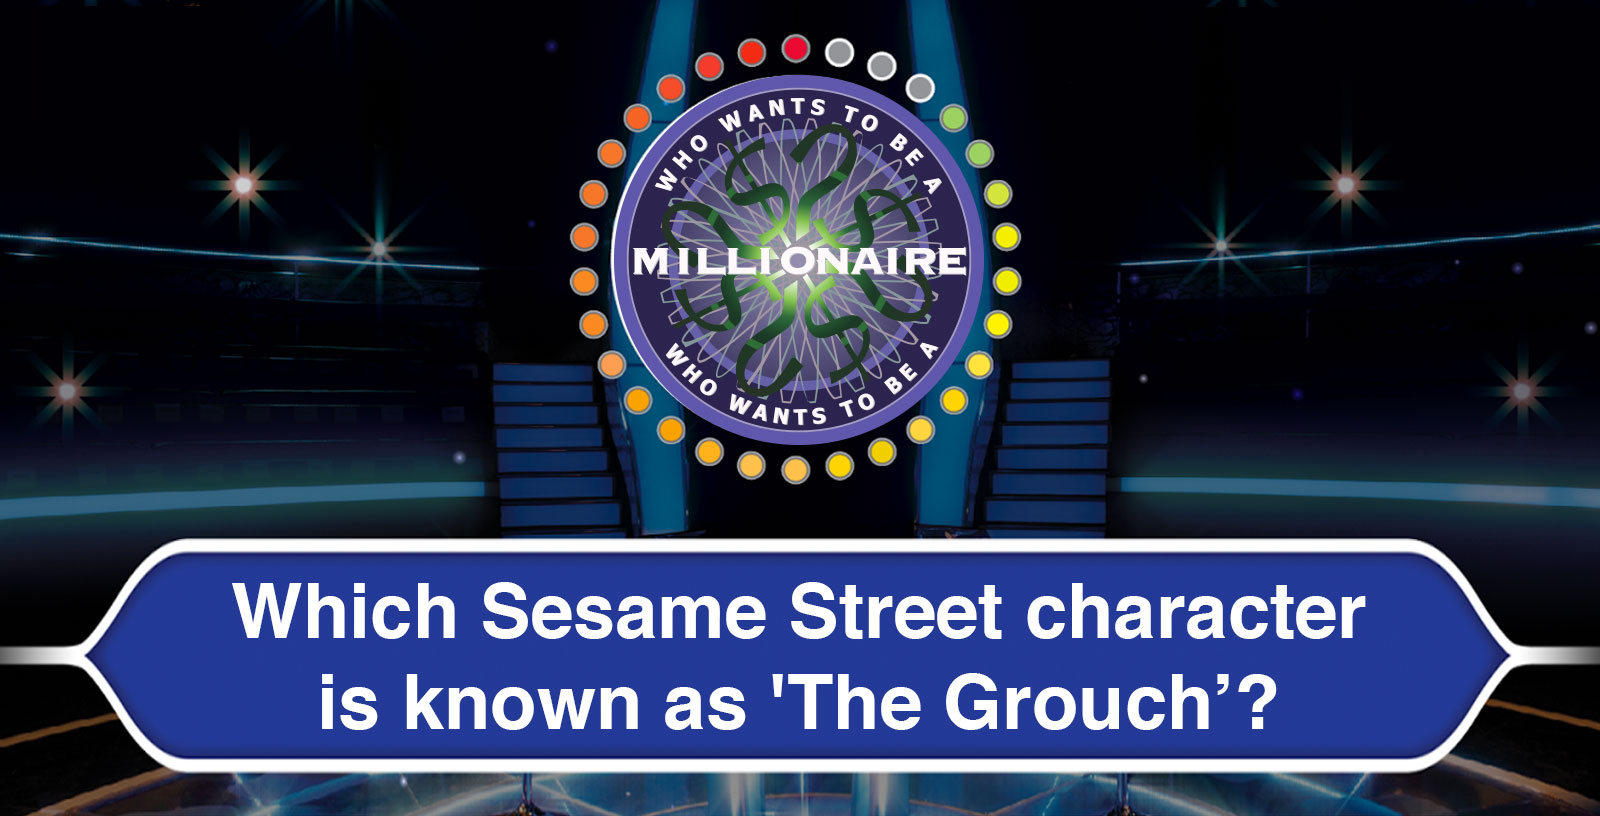 millionaire trivia: who wants to be a millionaire? answers